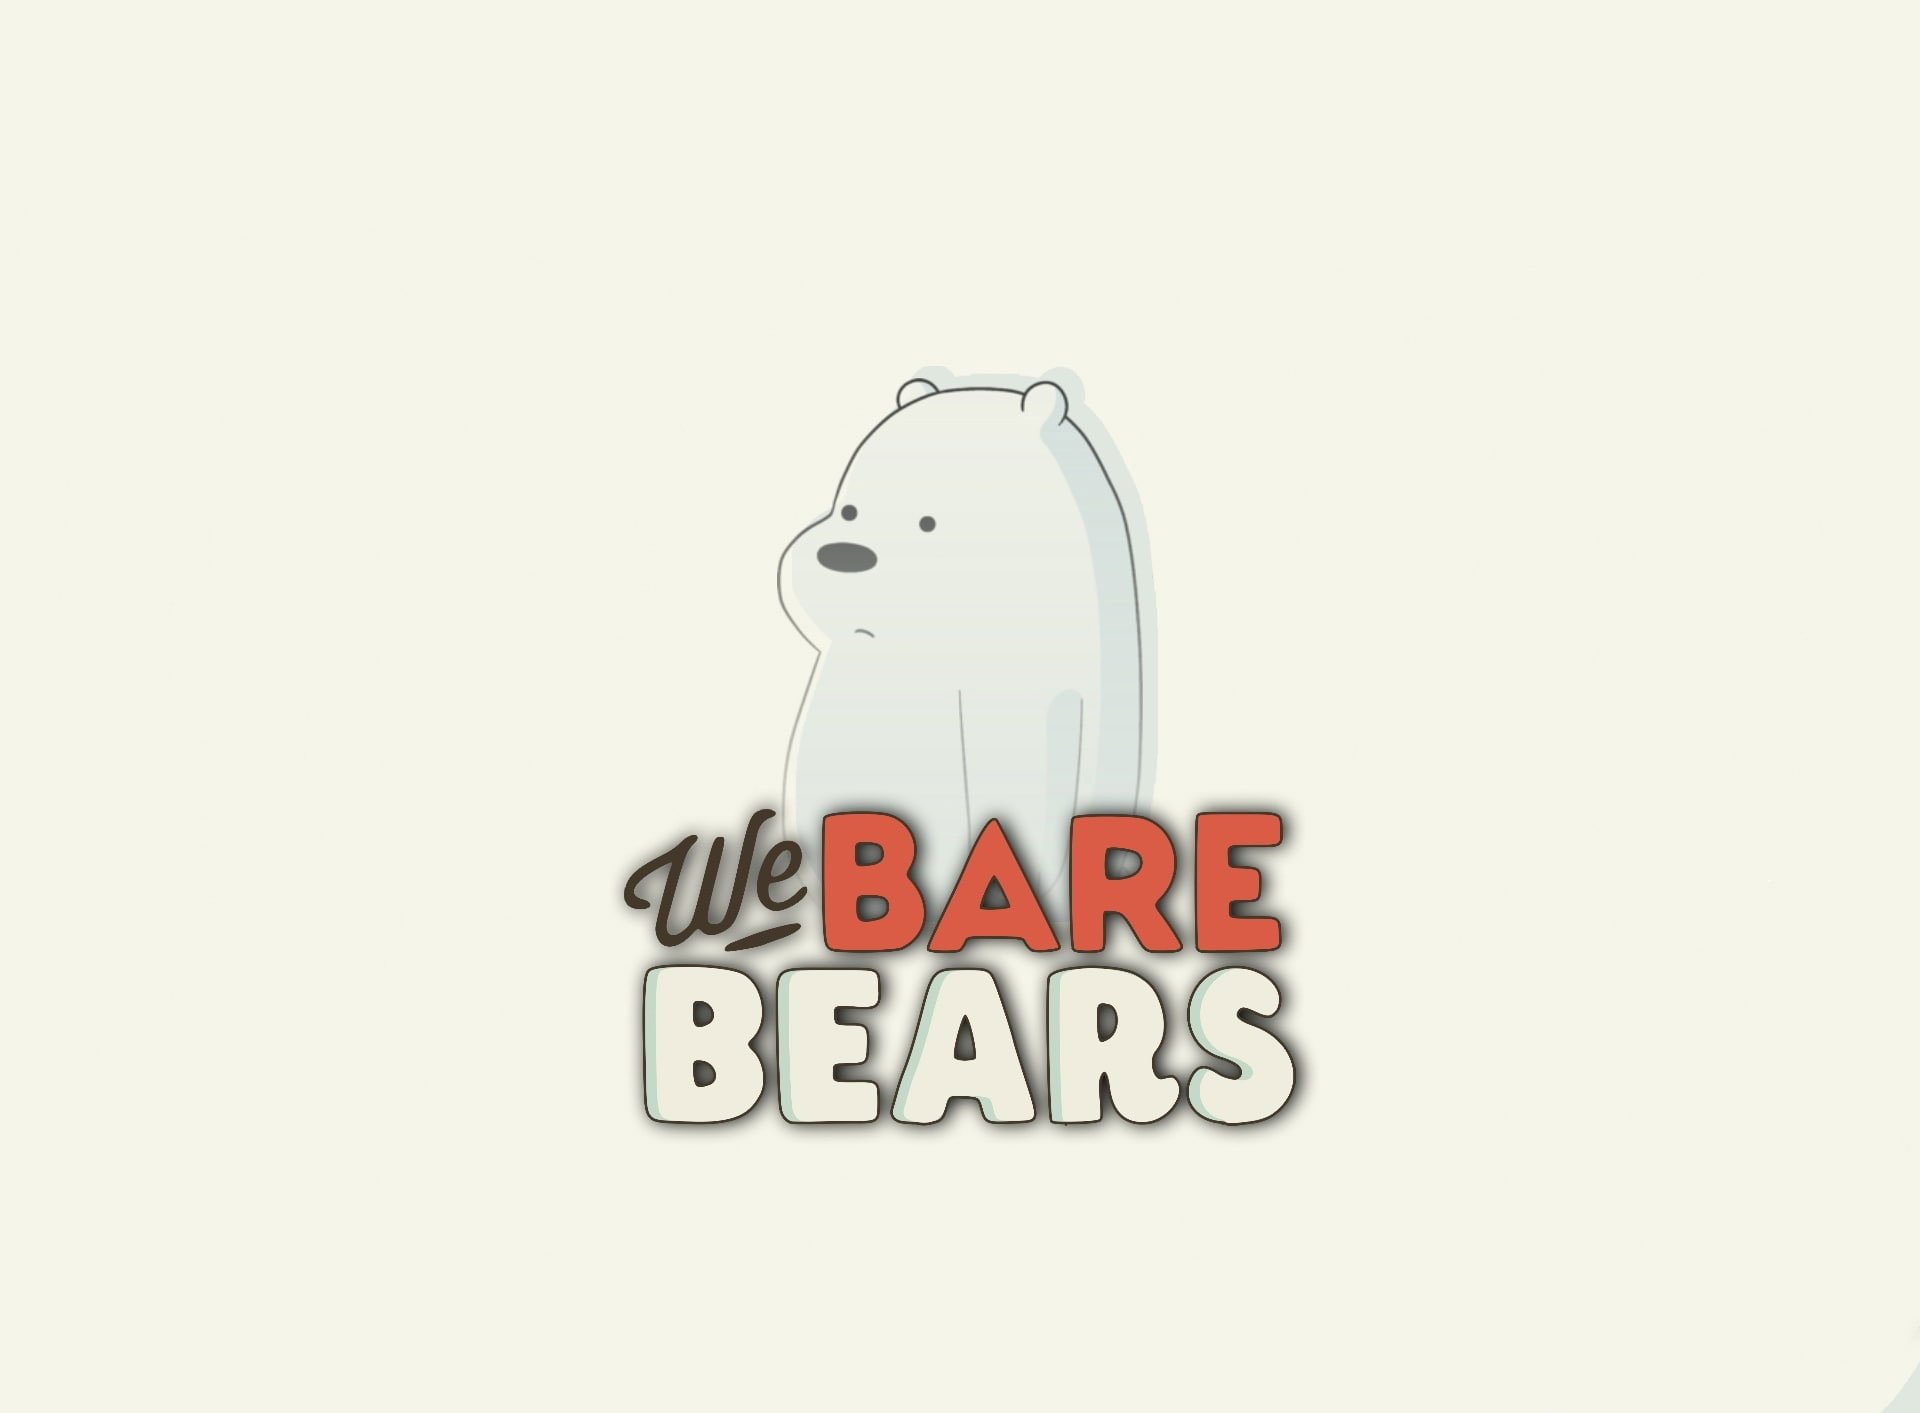 We Bare Bears wallpaper with the bears standing on the text - We Bare Bears